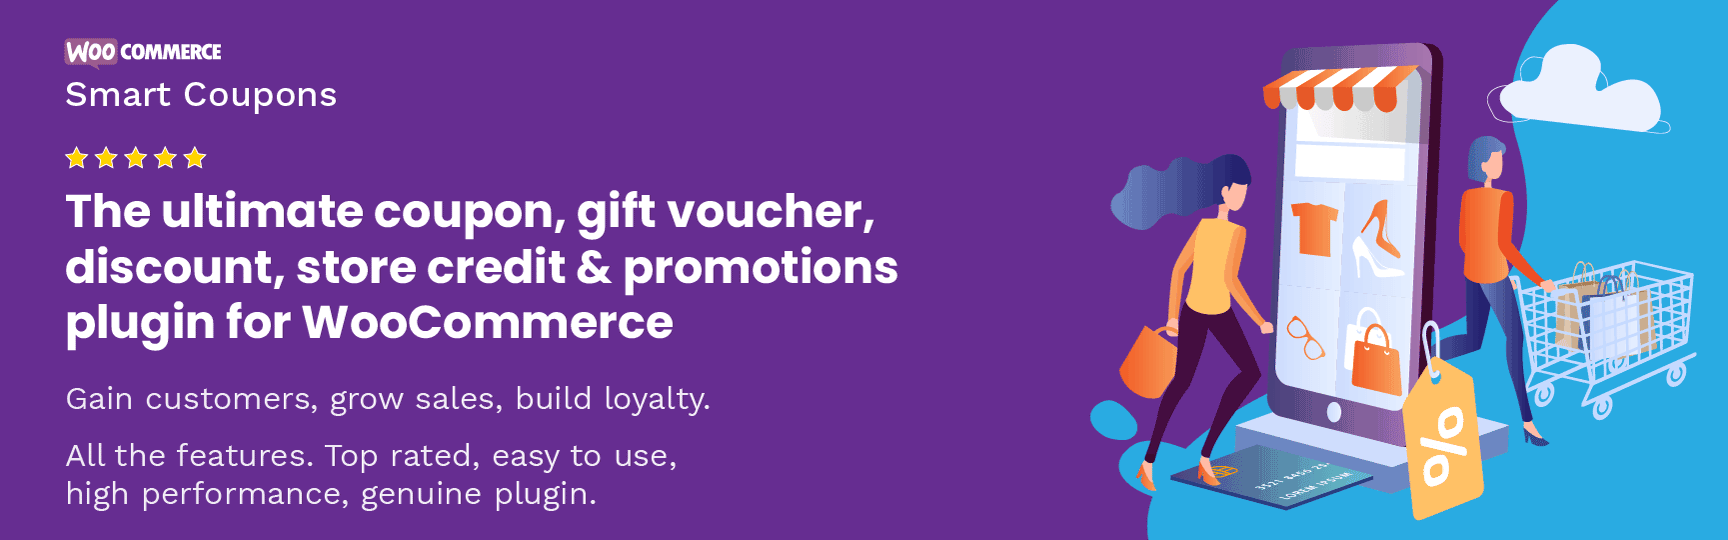 7+ Ways to Maximize Coupons on Your WordPress Site